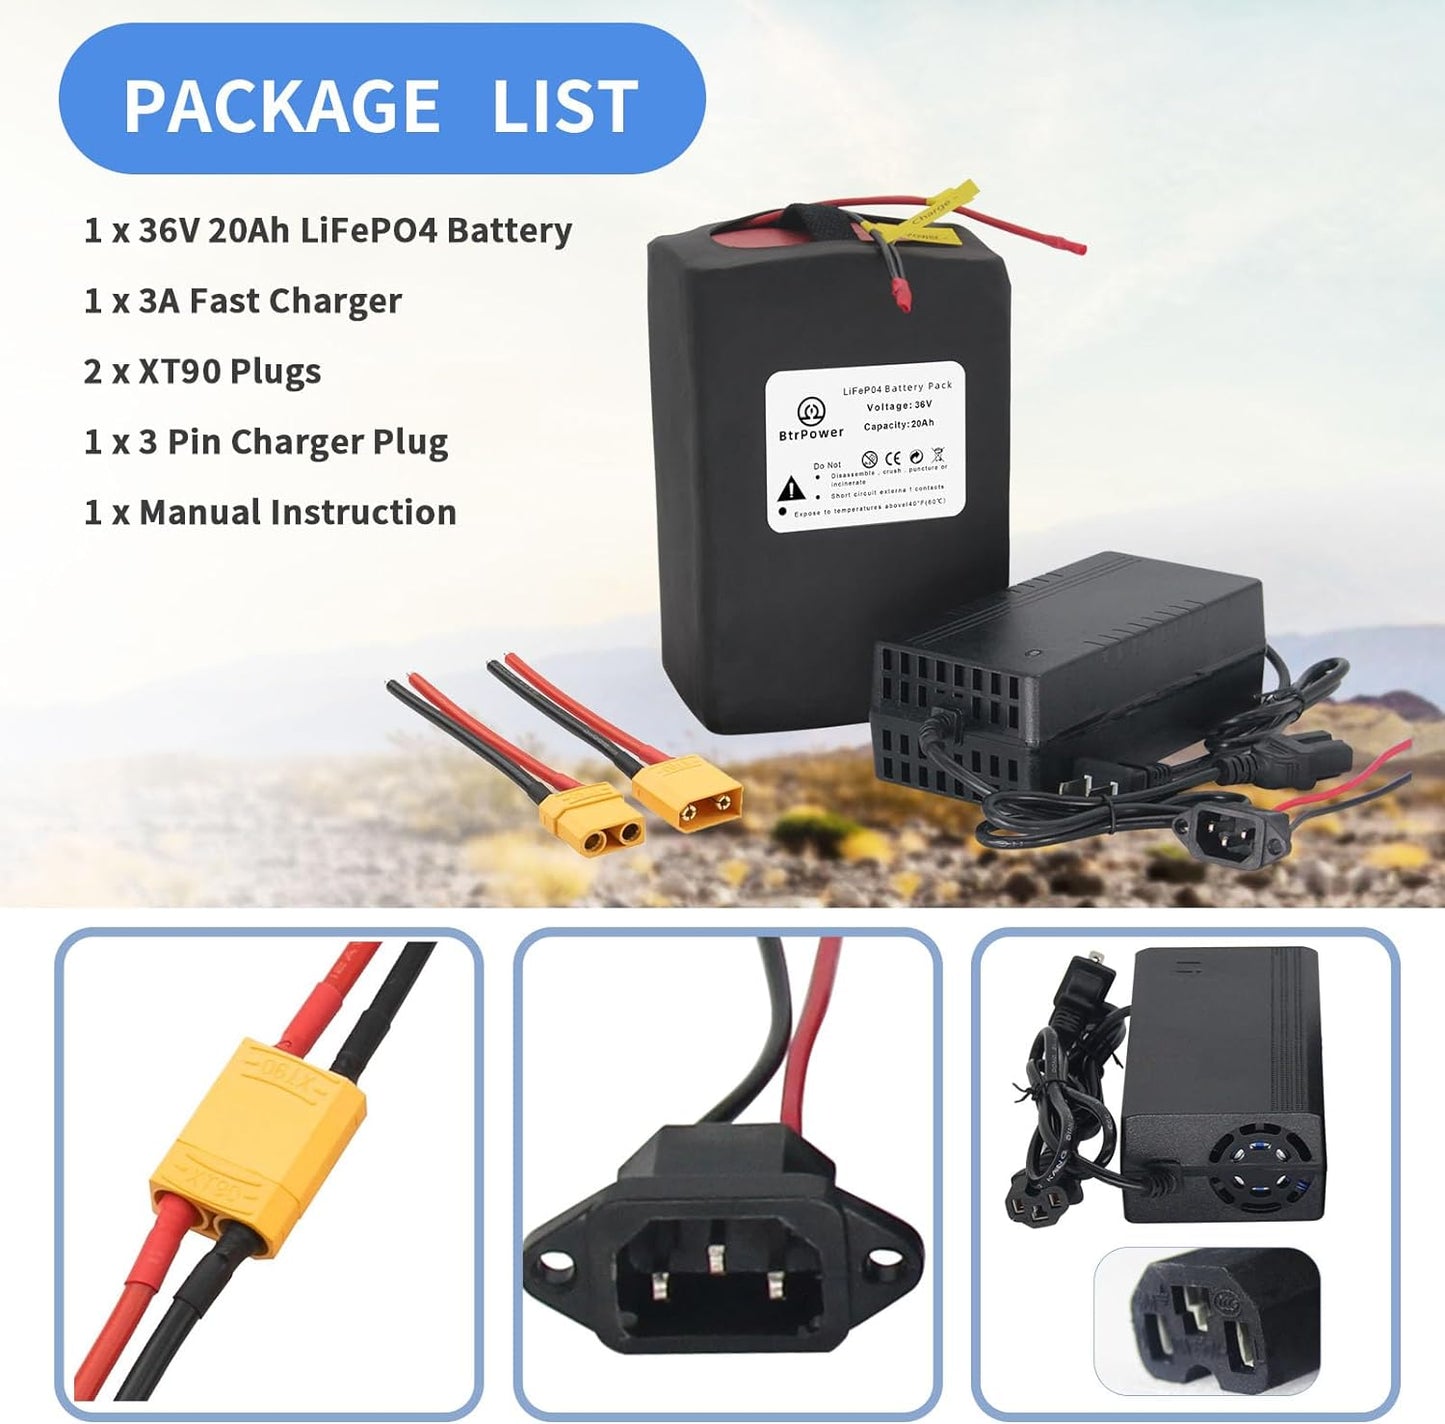 BtrPower 36V 20AH Ebike Battery LiFePo4 Battery Pack with 3A Charger, 30A BMS